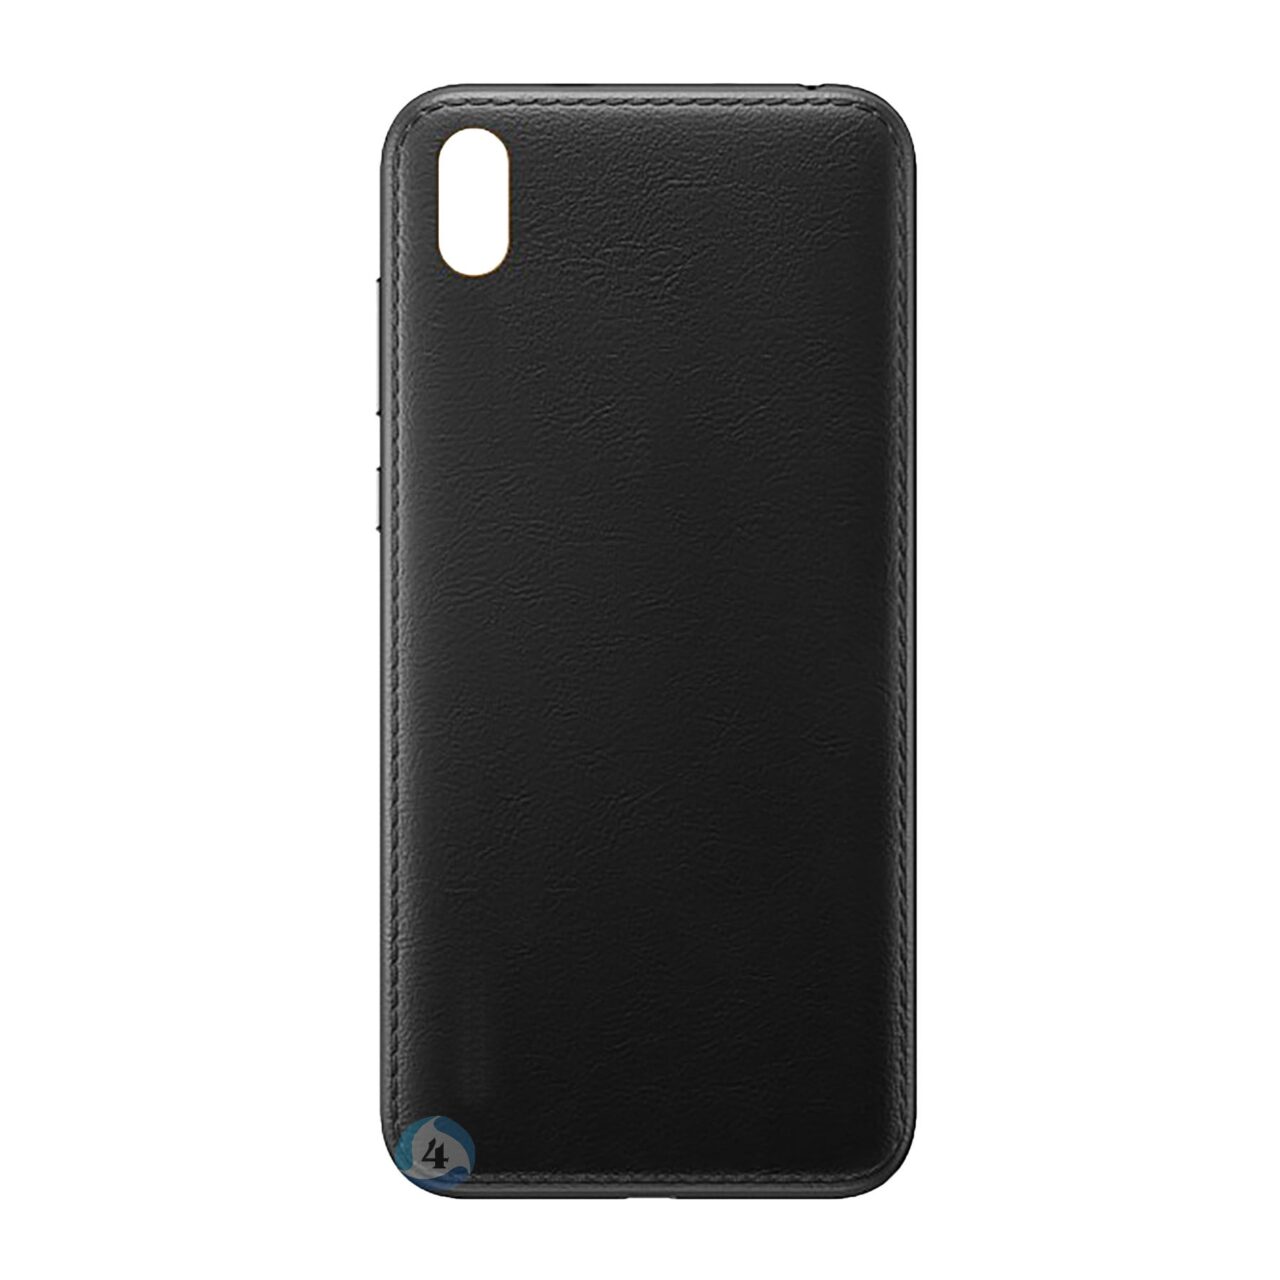 Huawei Y5 2019 backcover black leather